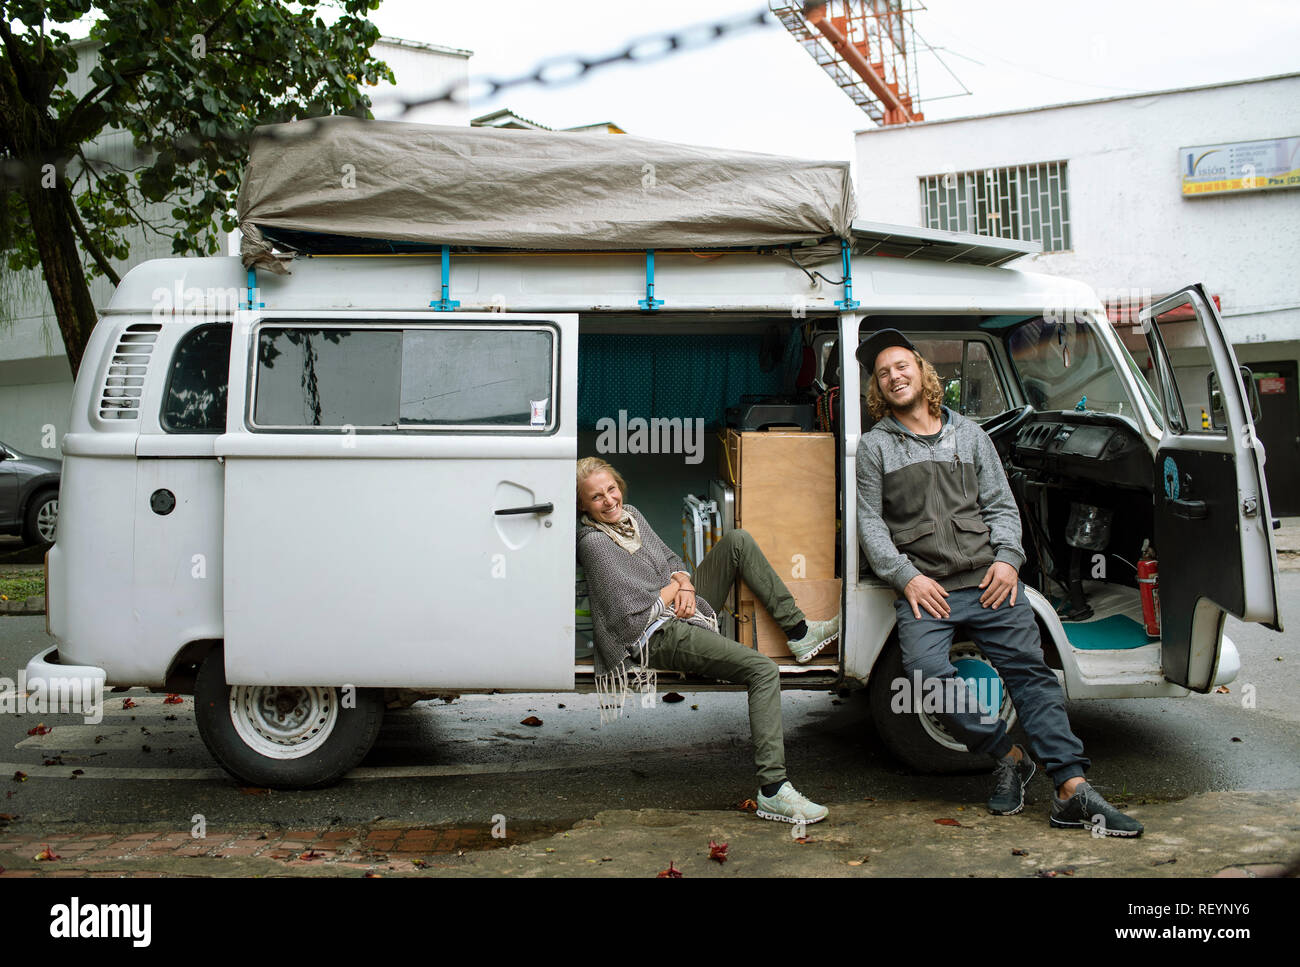 Volkswagen Camper van with a young European travelling lifestyle (environmental portrait, editorial use). Medellín, Colombia. Sep 2018 Stock Photo -